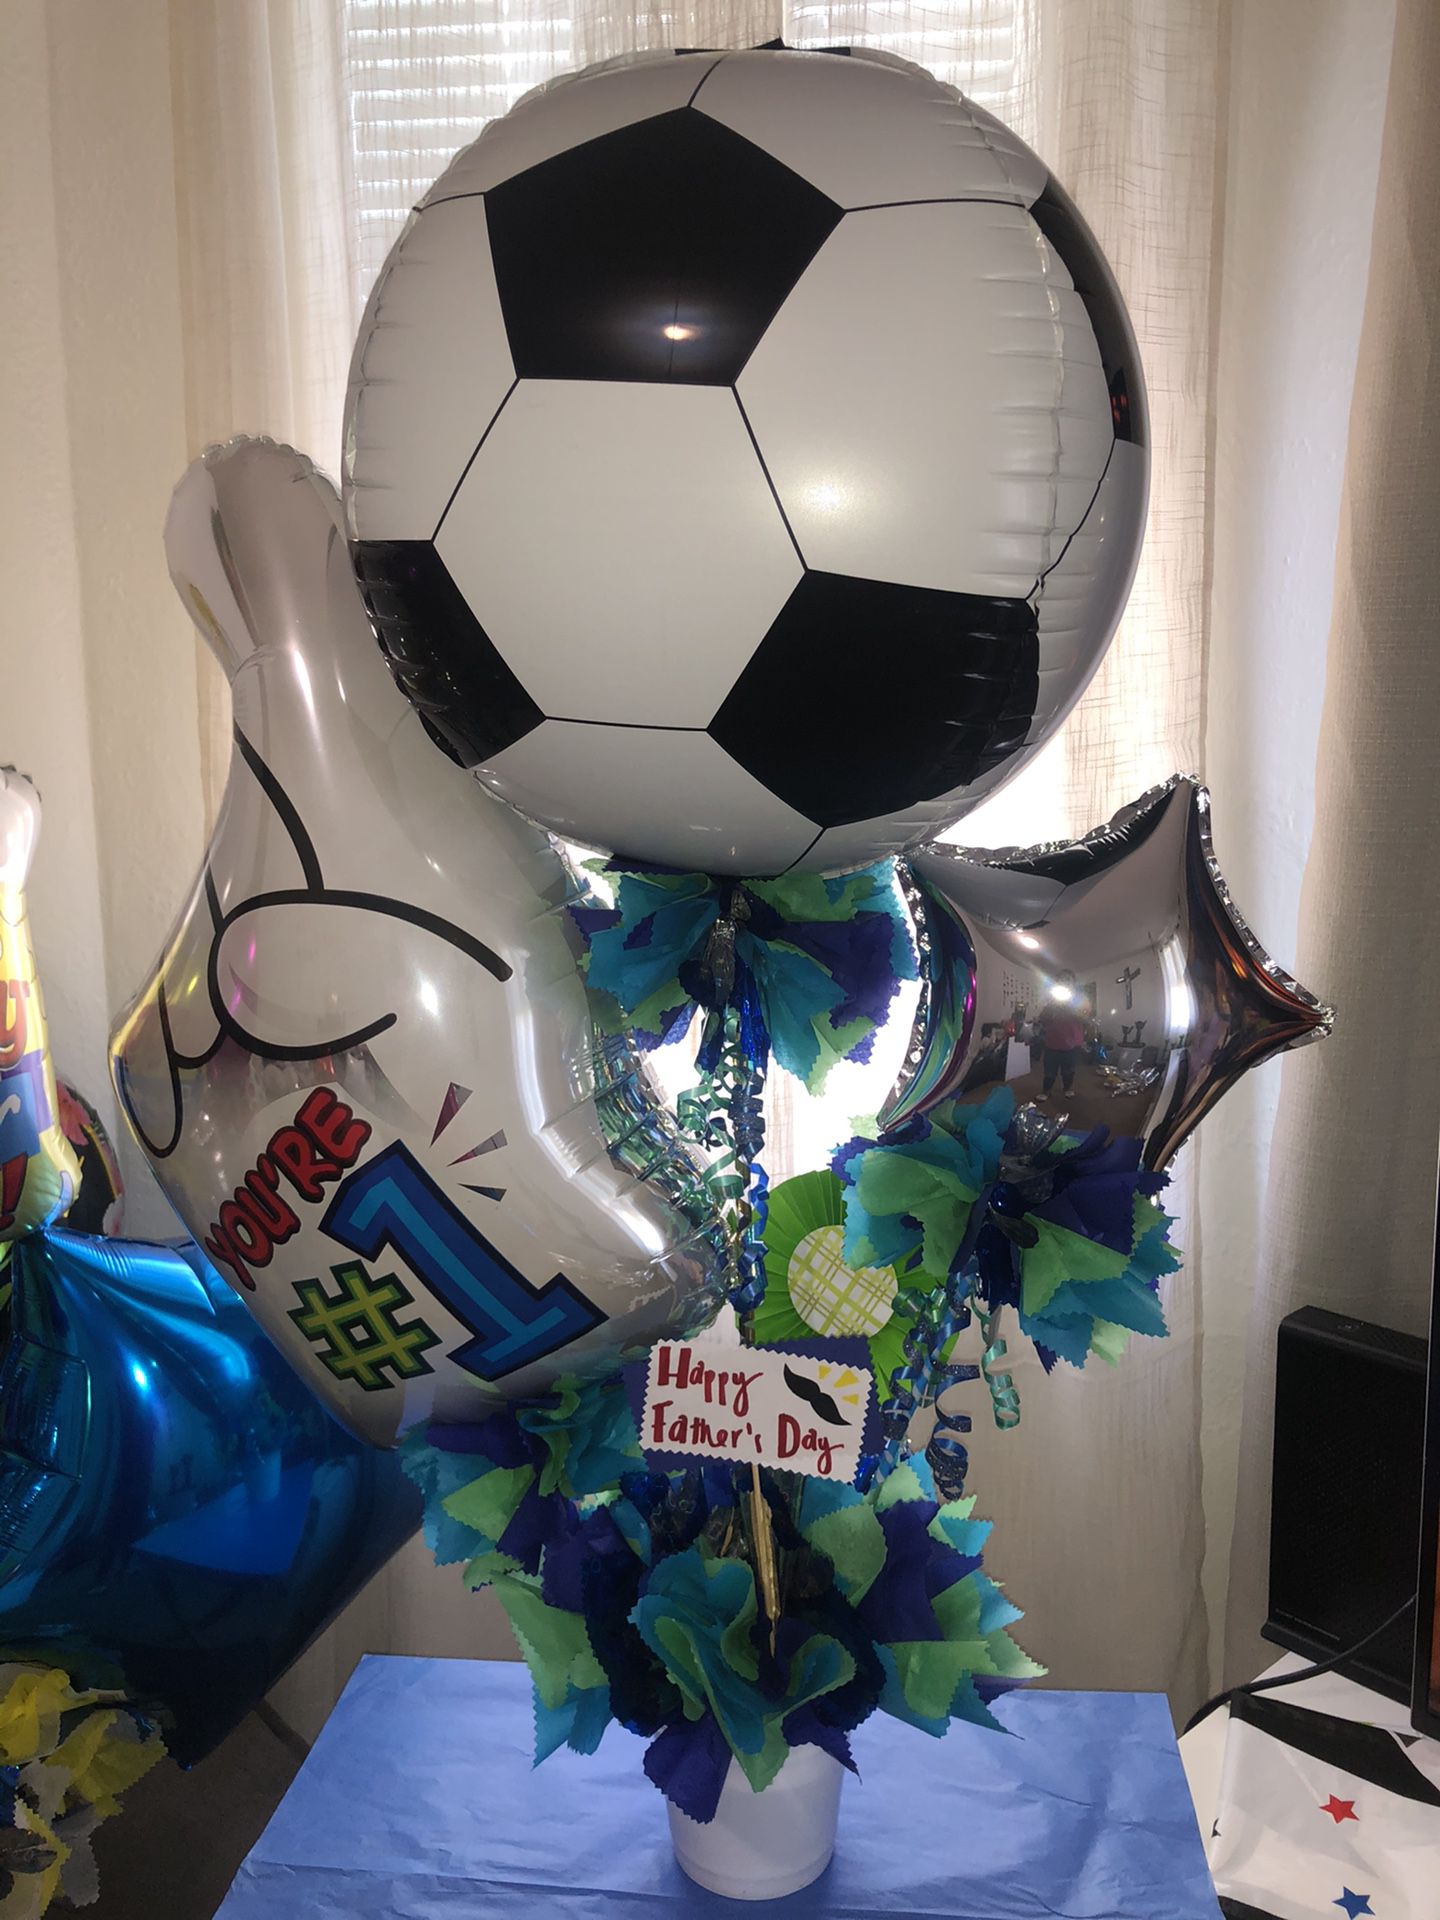 Balloon Arrangement for Father’s Day !